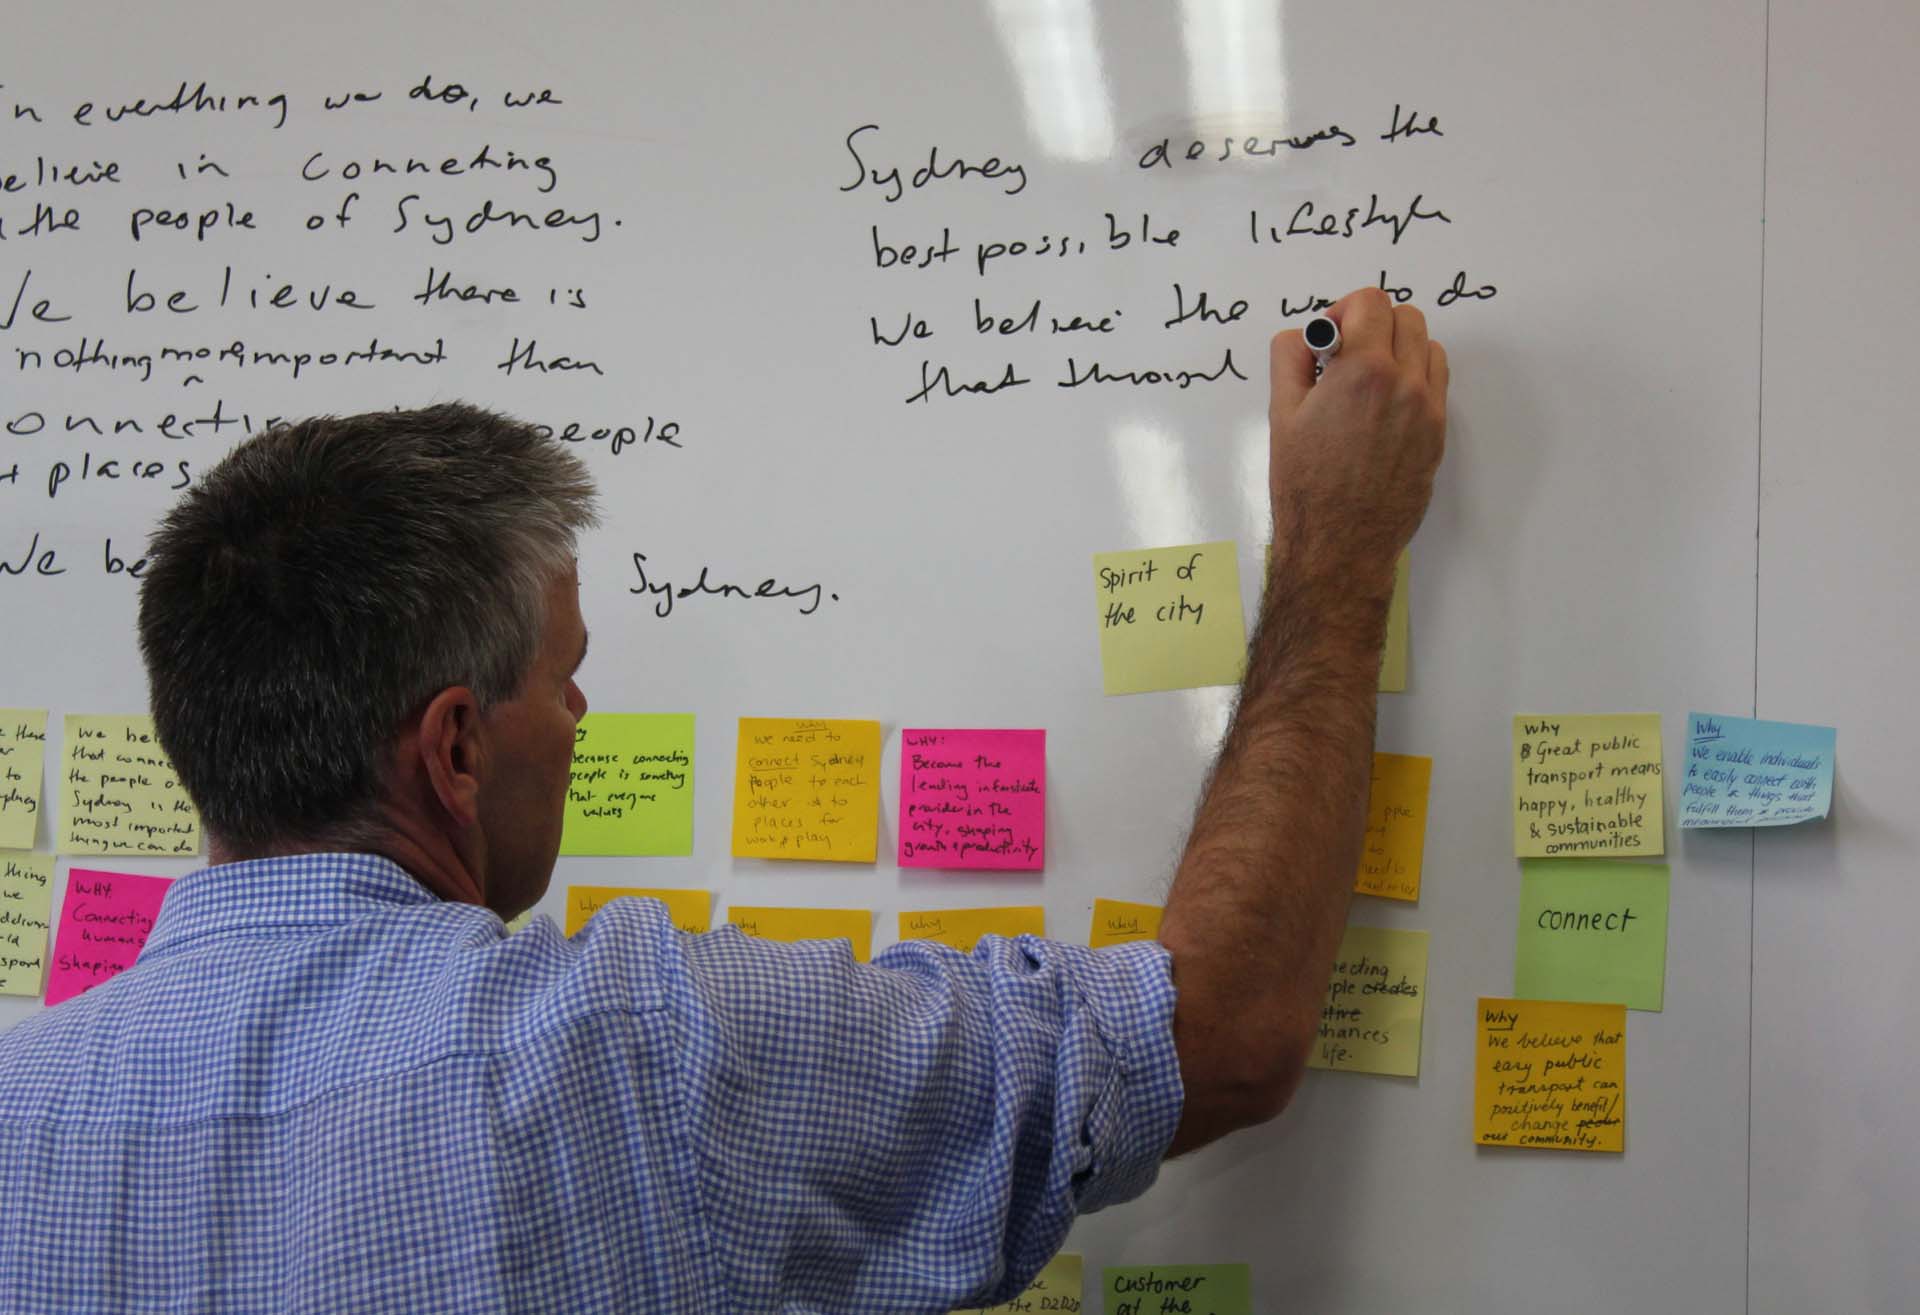 Proto CEO Damian Kernahan writing notes on a customer experice journey design wall